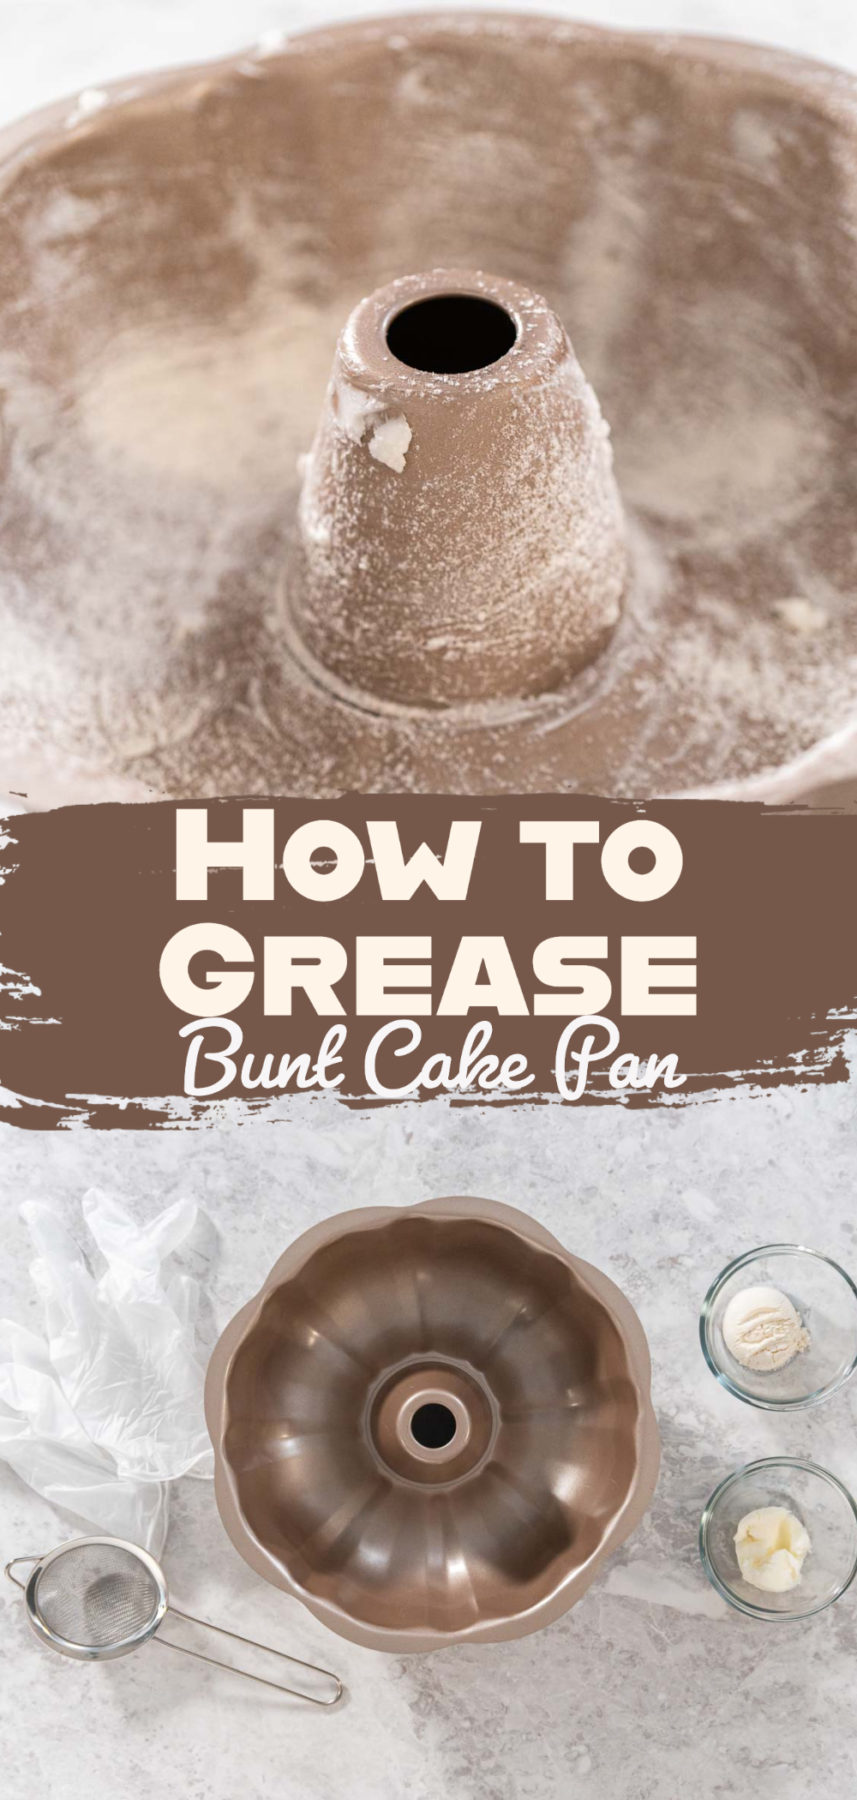 How to Grease Bunt Cake Pan - YouTube